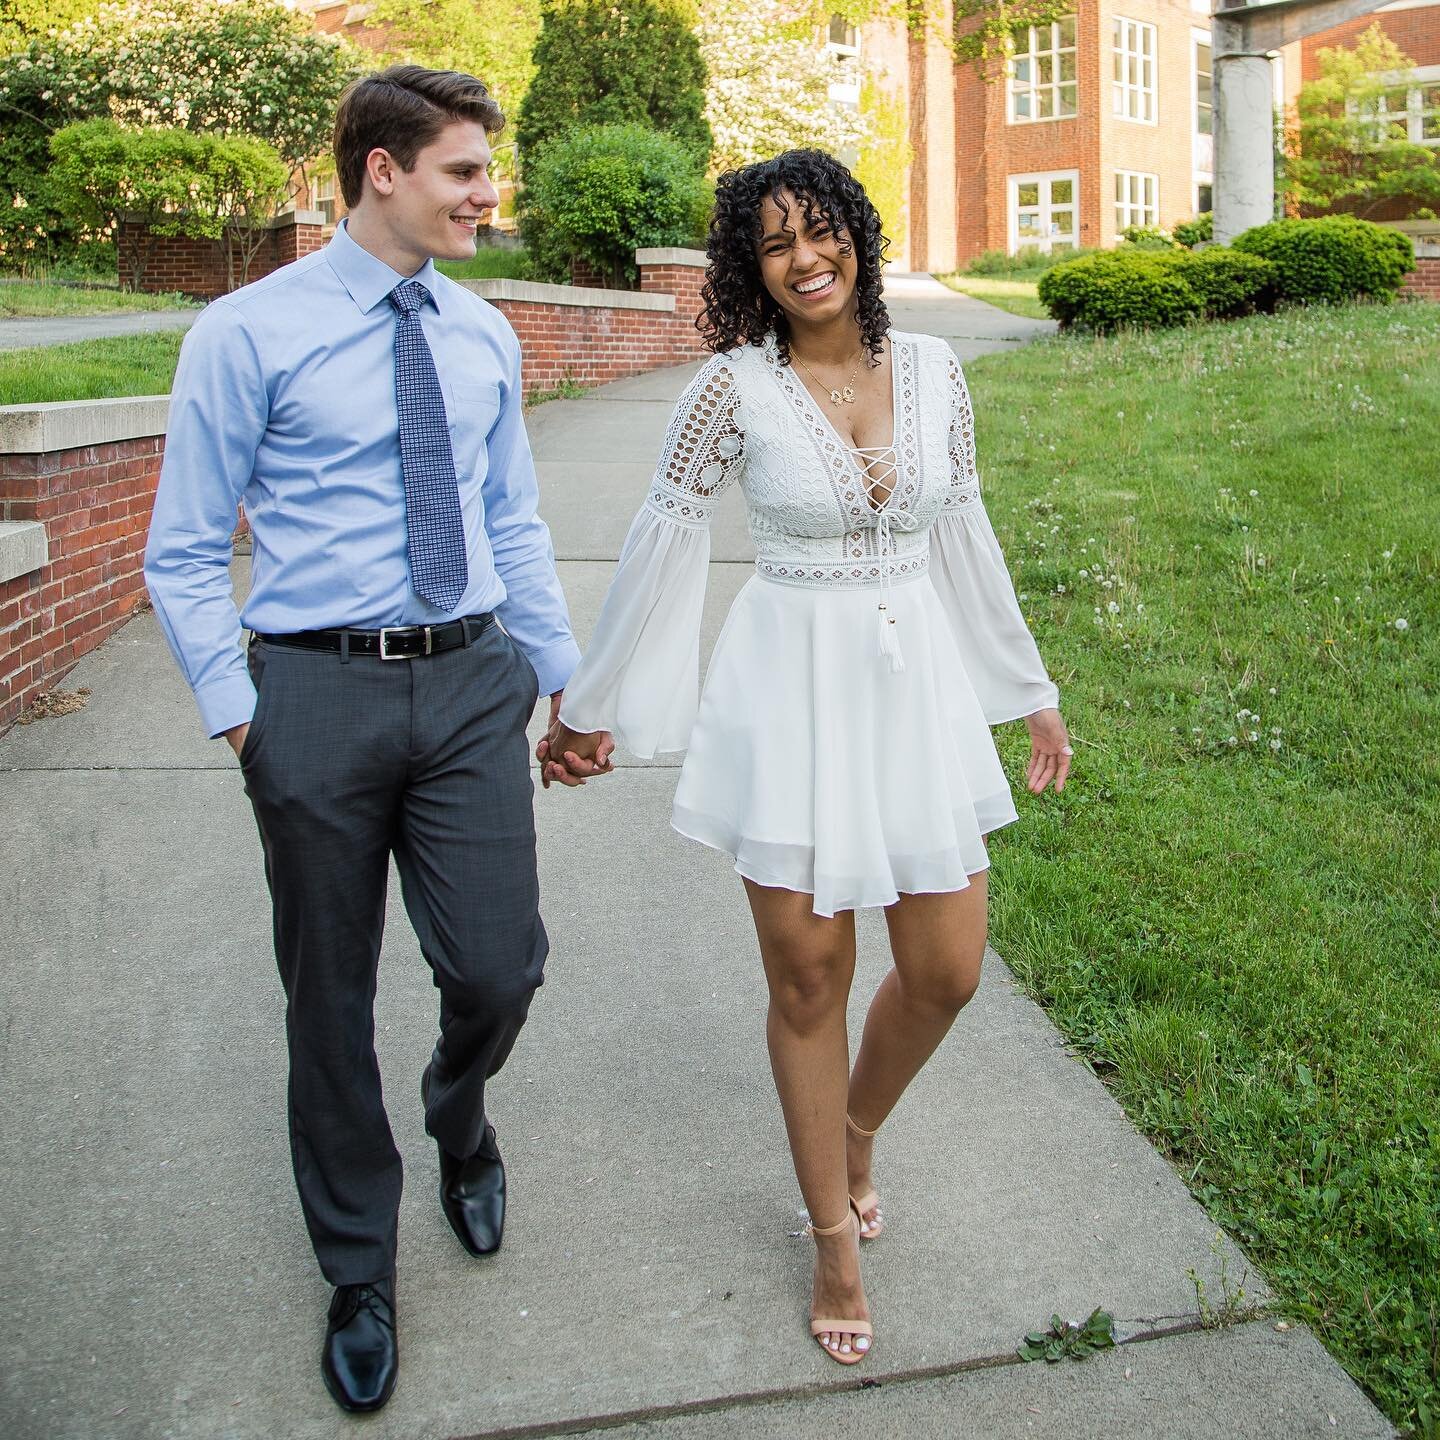 Still can&rsquo;t get over this session and how beautiful these two humans are 🥰😍
@sunygeneseo #geneseo #lassandbeau